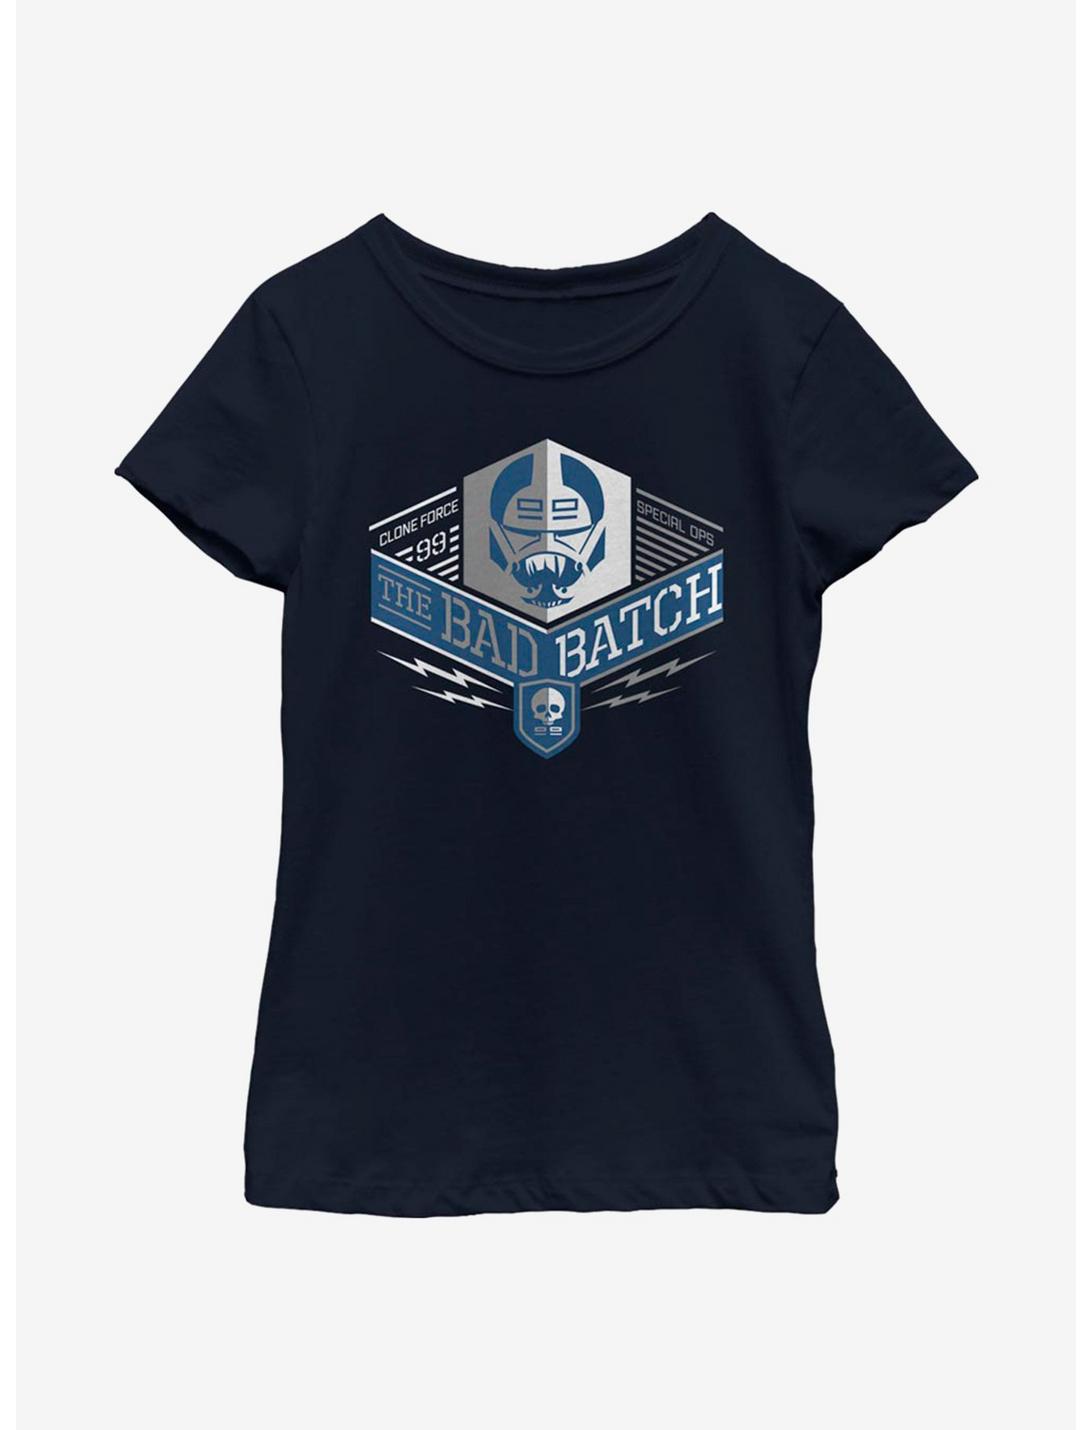 Star Wars: The Bad Batch The Special Ops Youth Girls T-Shirt, NAVY, hi-res